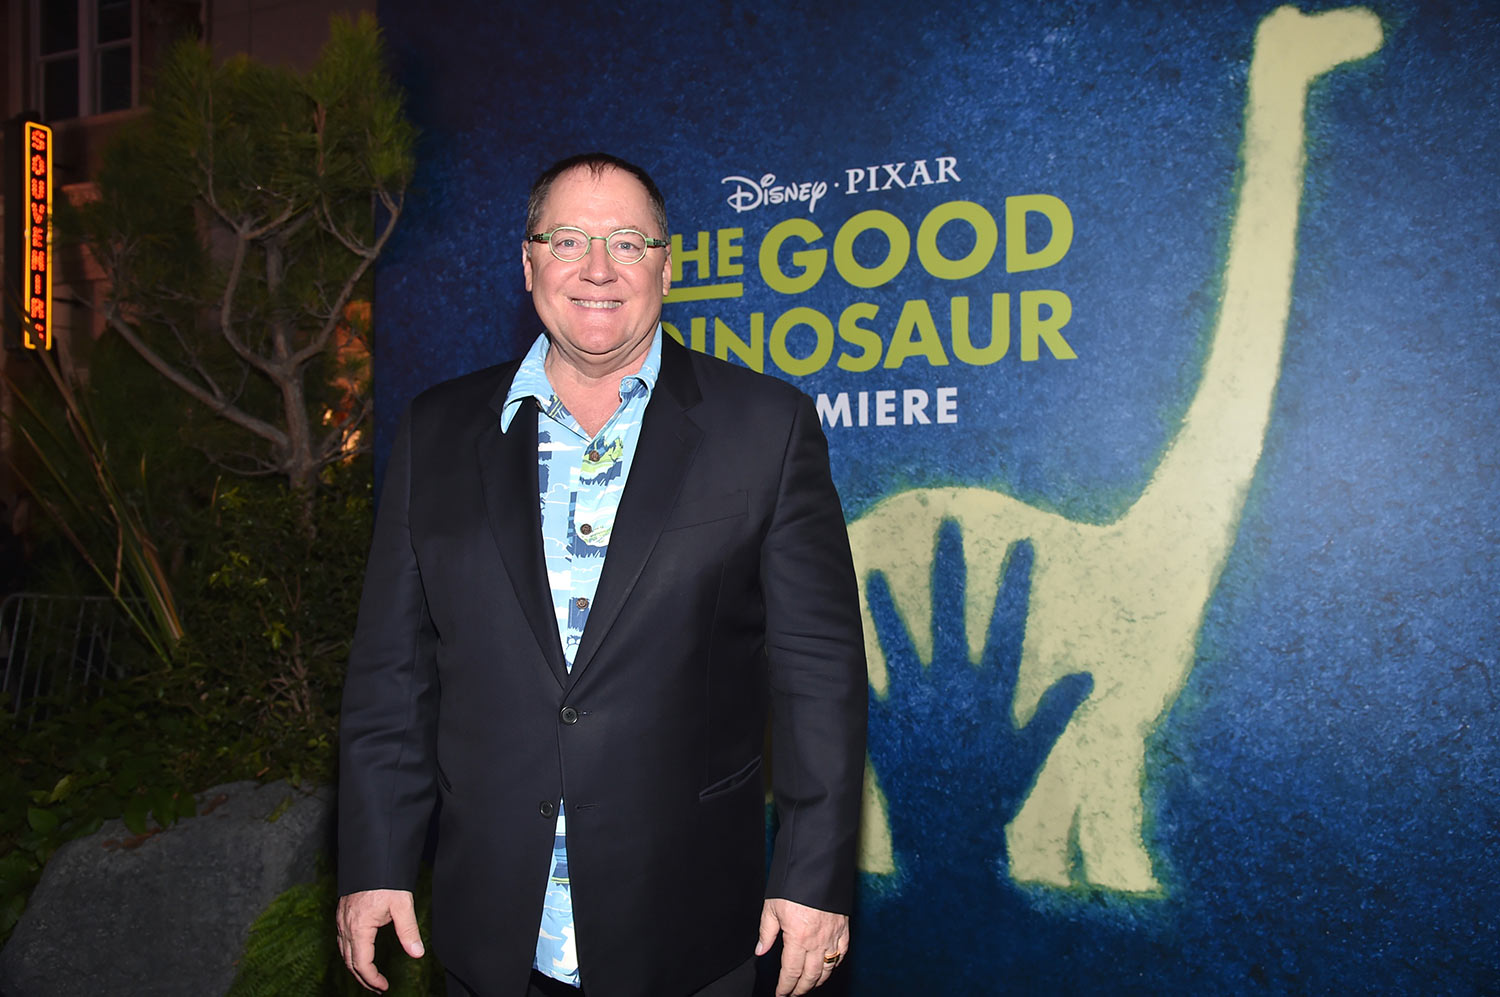 “But it was an even more memorable evening for me…John Lasseter.”